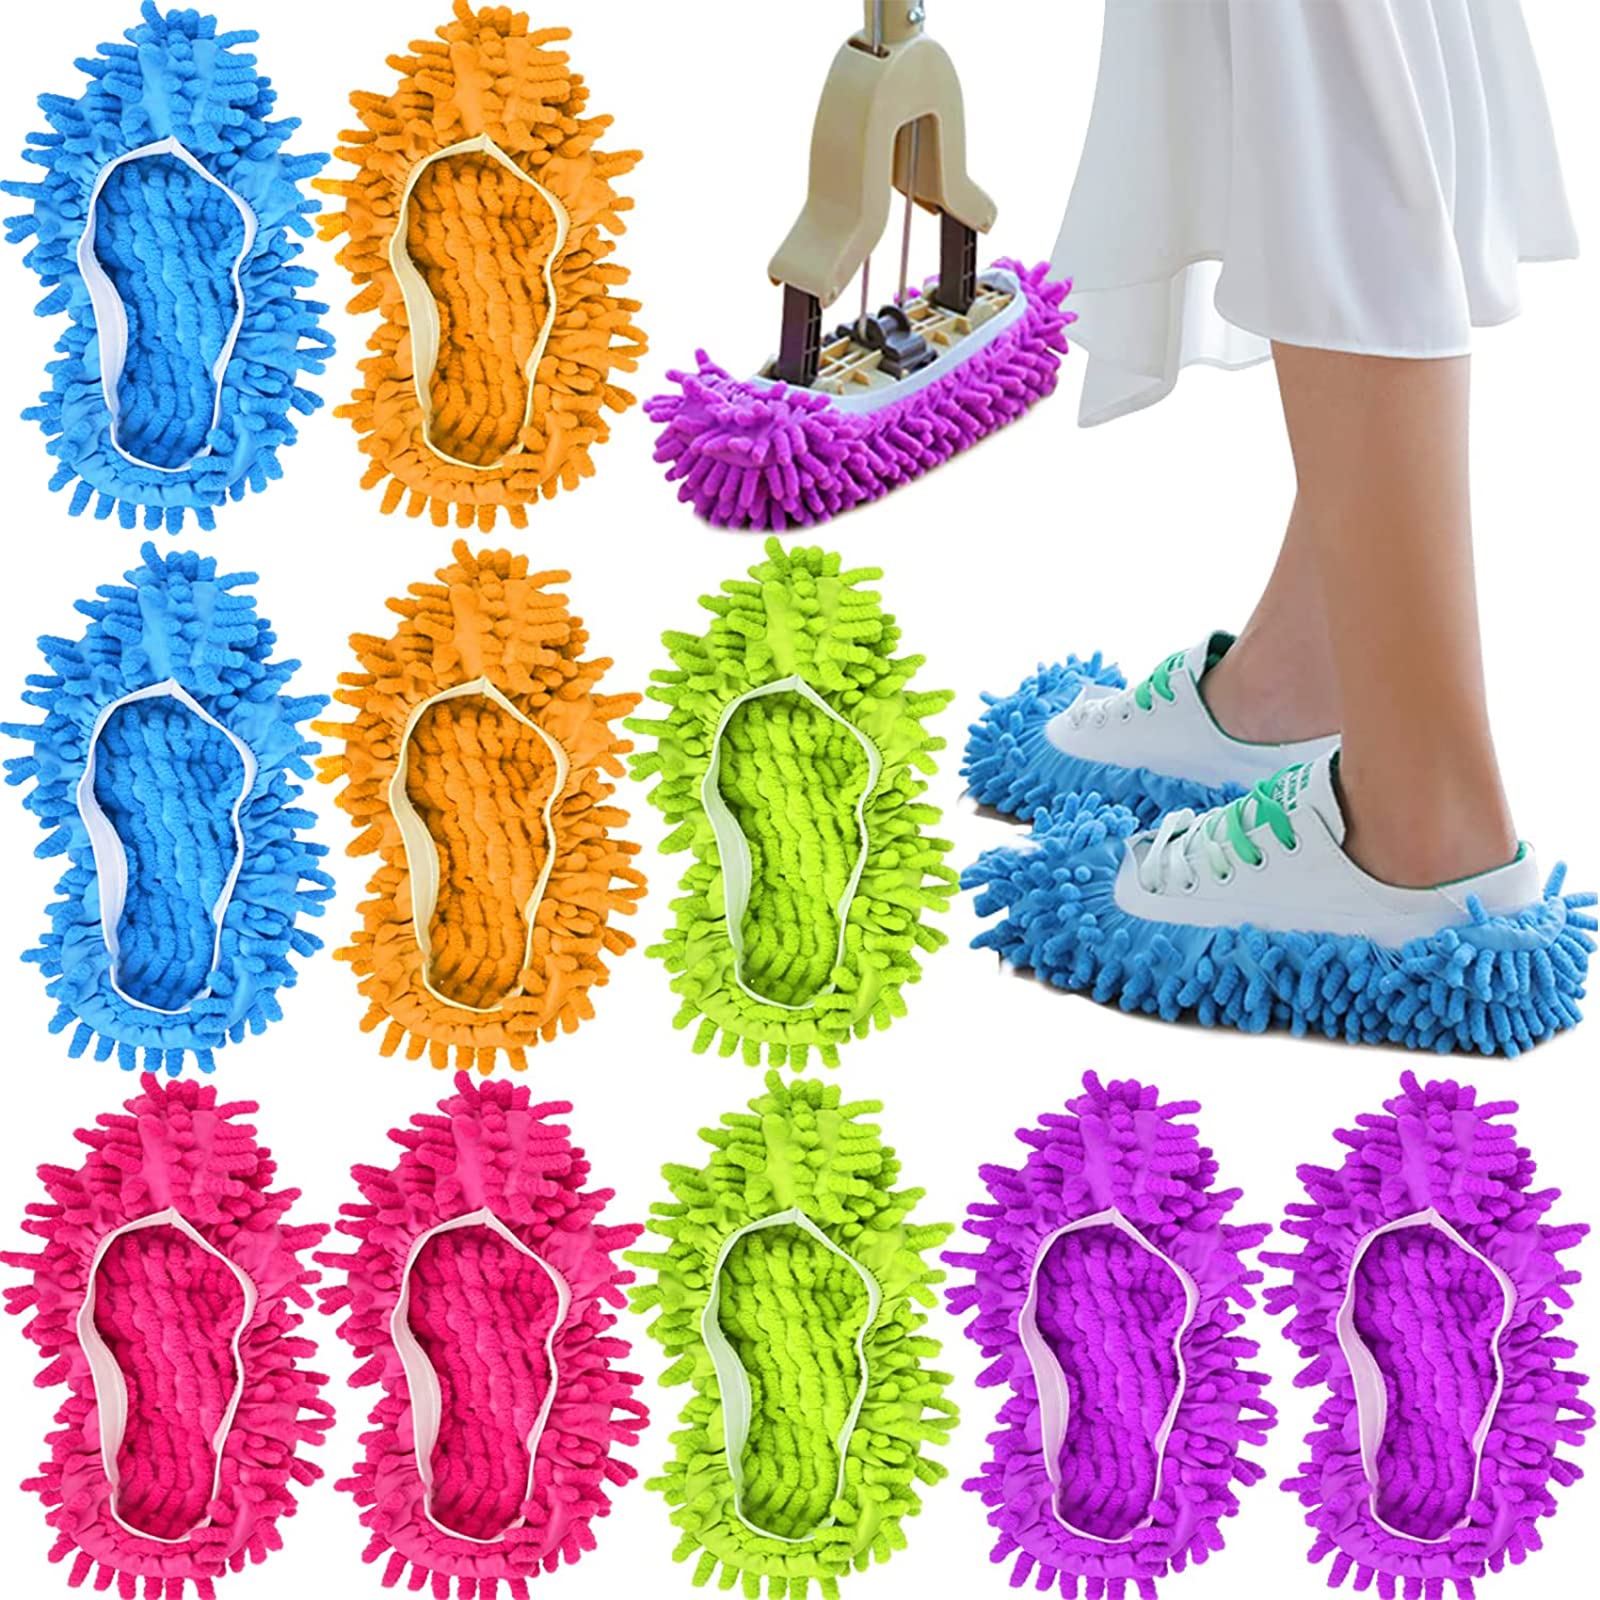 Microfiber Mop Slippers Shoes Cover